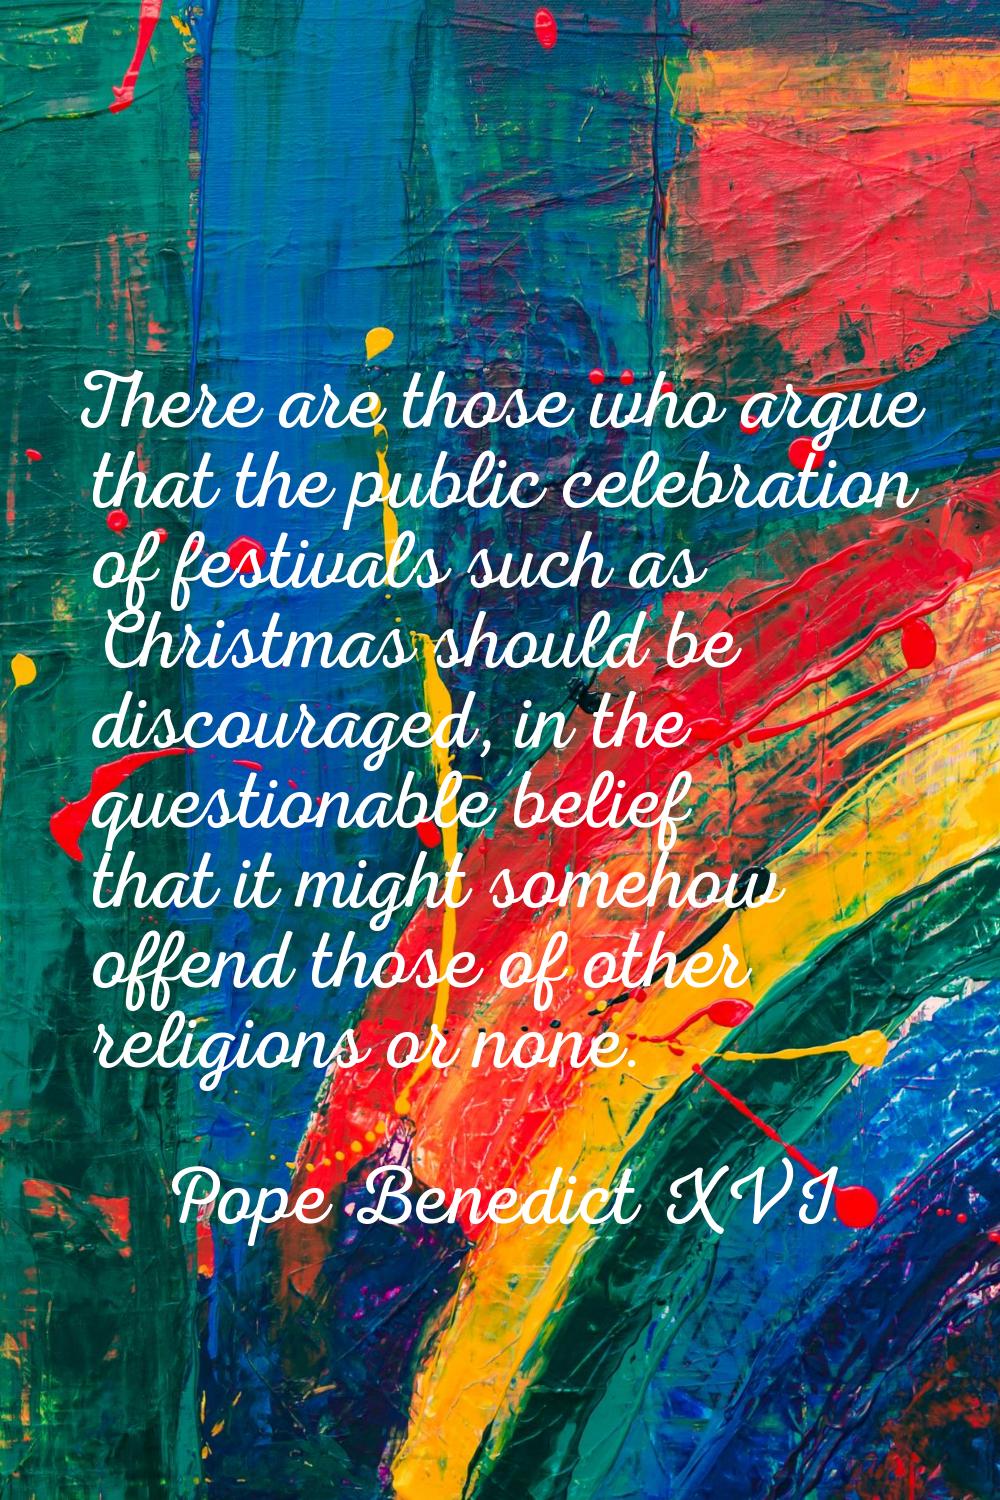 There are those who argue that the public celebration of festivals such as Christmas should be disc